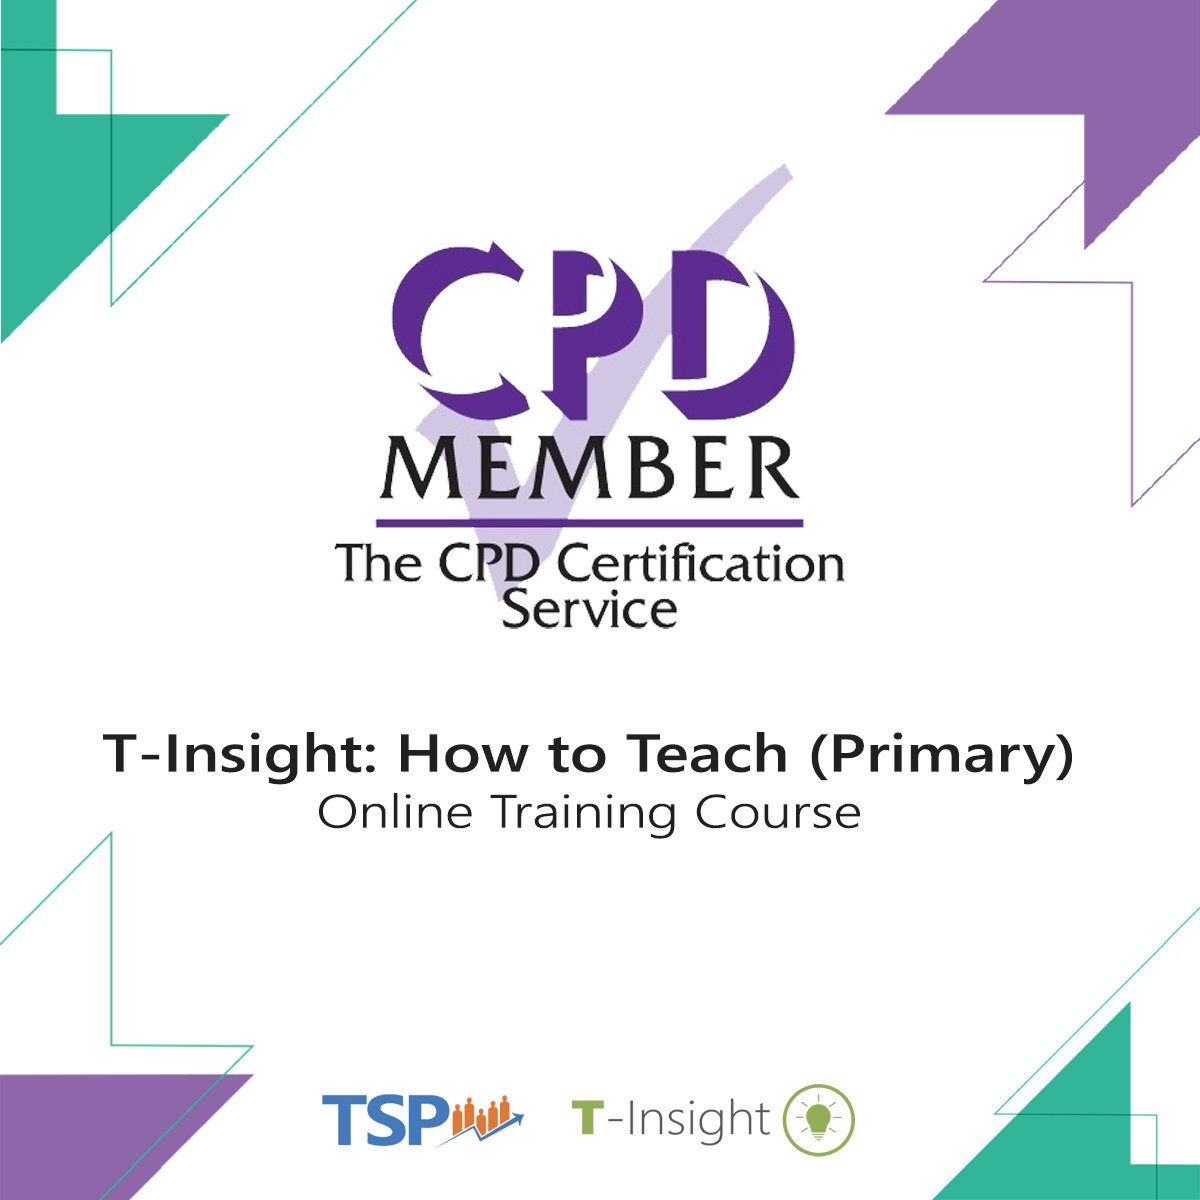 We're delighted to announce that our 'T-Insight: How to Teach (Primary)' course has been certified by the #CPD certification service as conforming to principles of the highest standard. #teachertraining #learning  #education